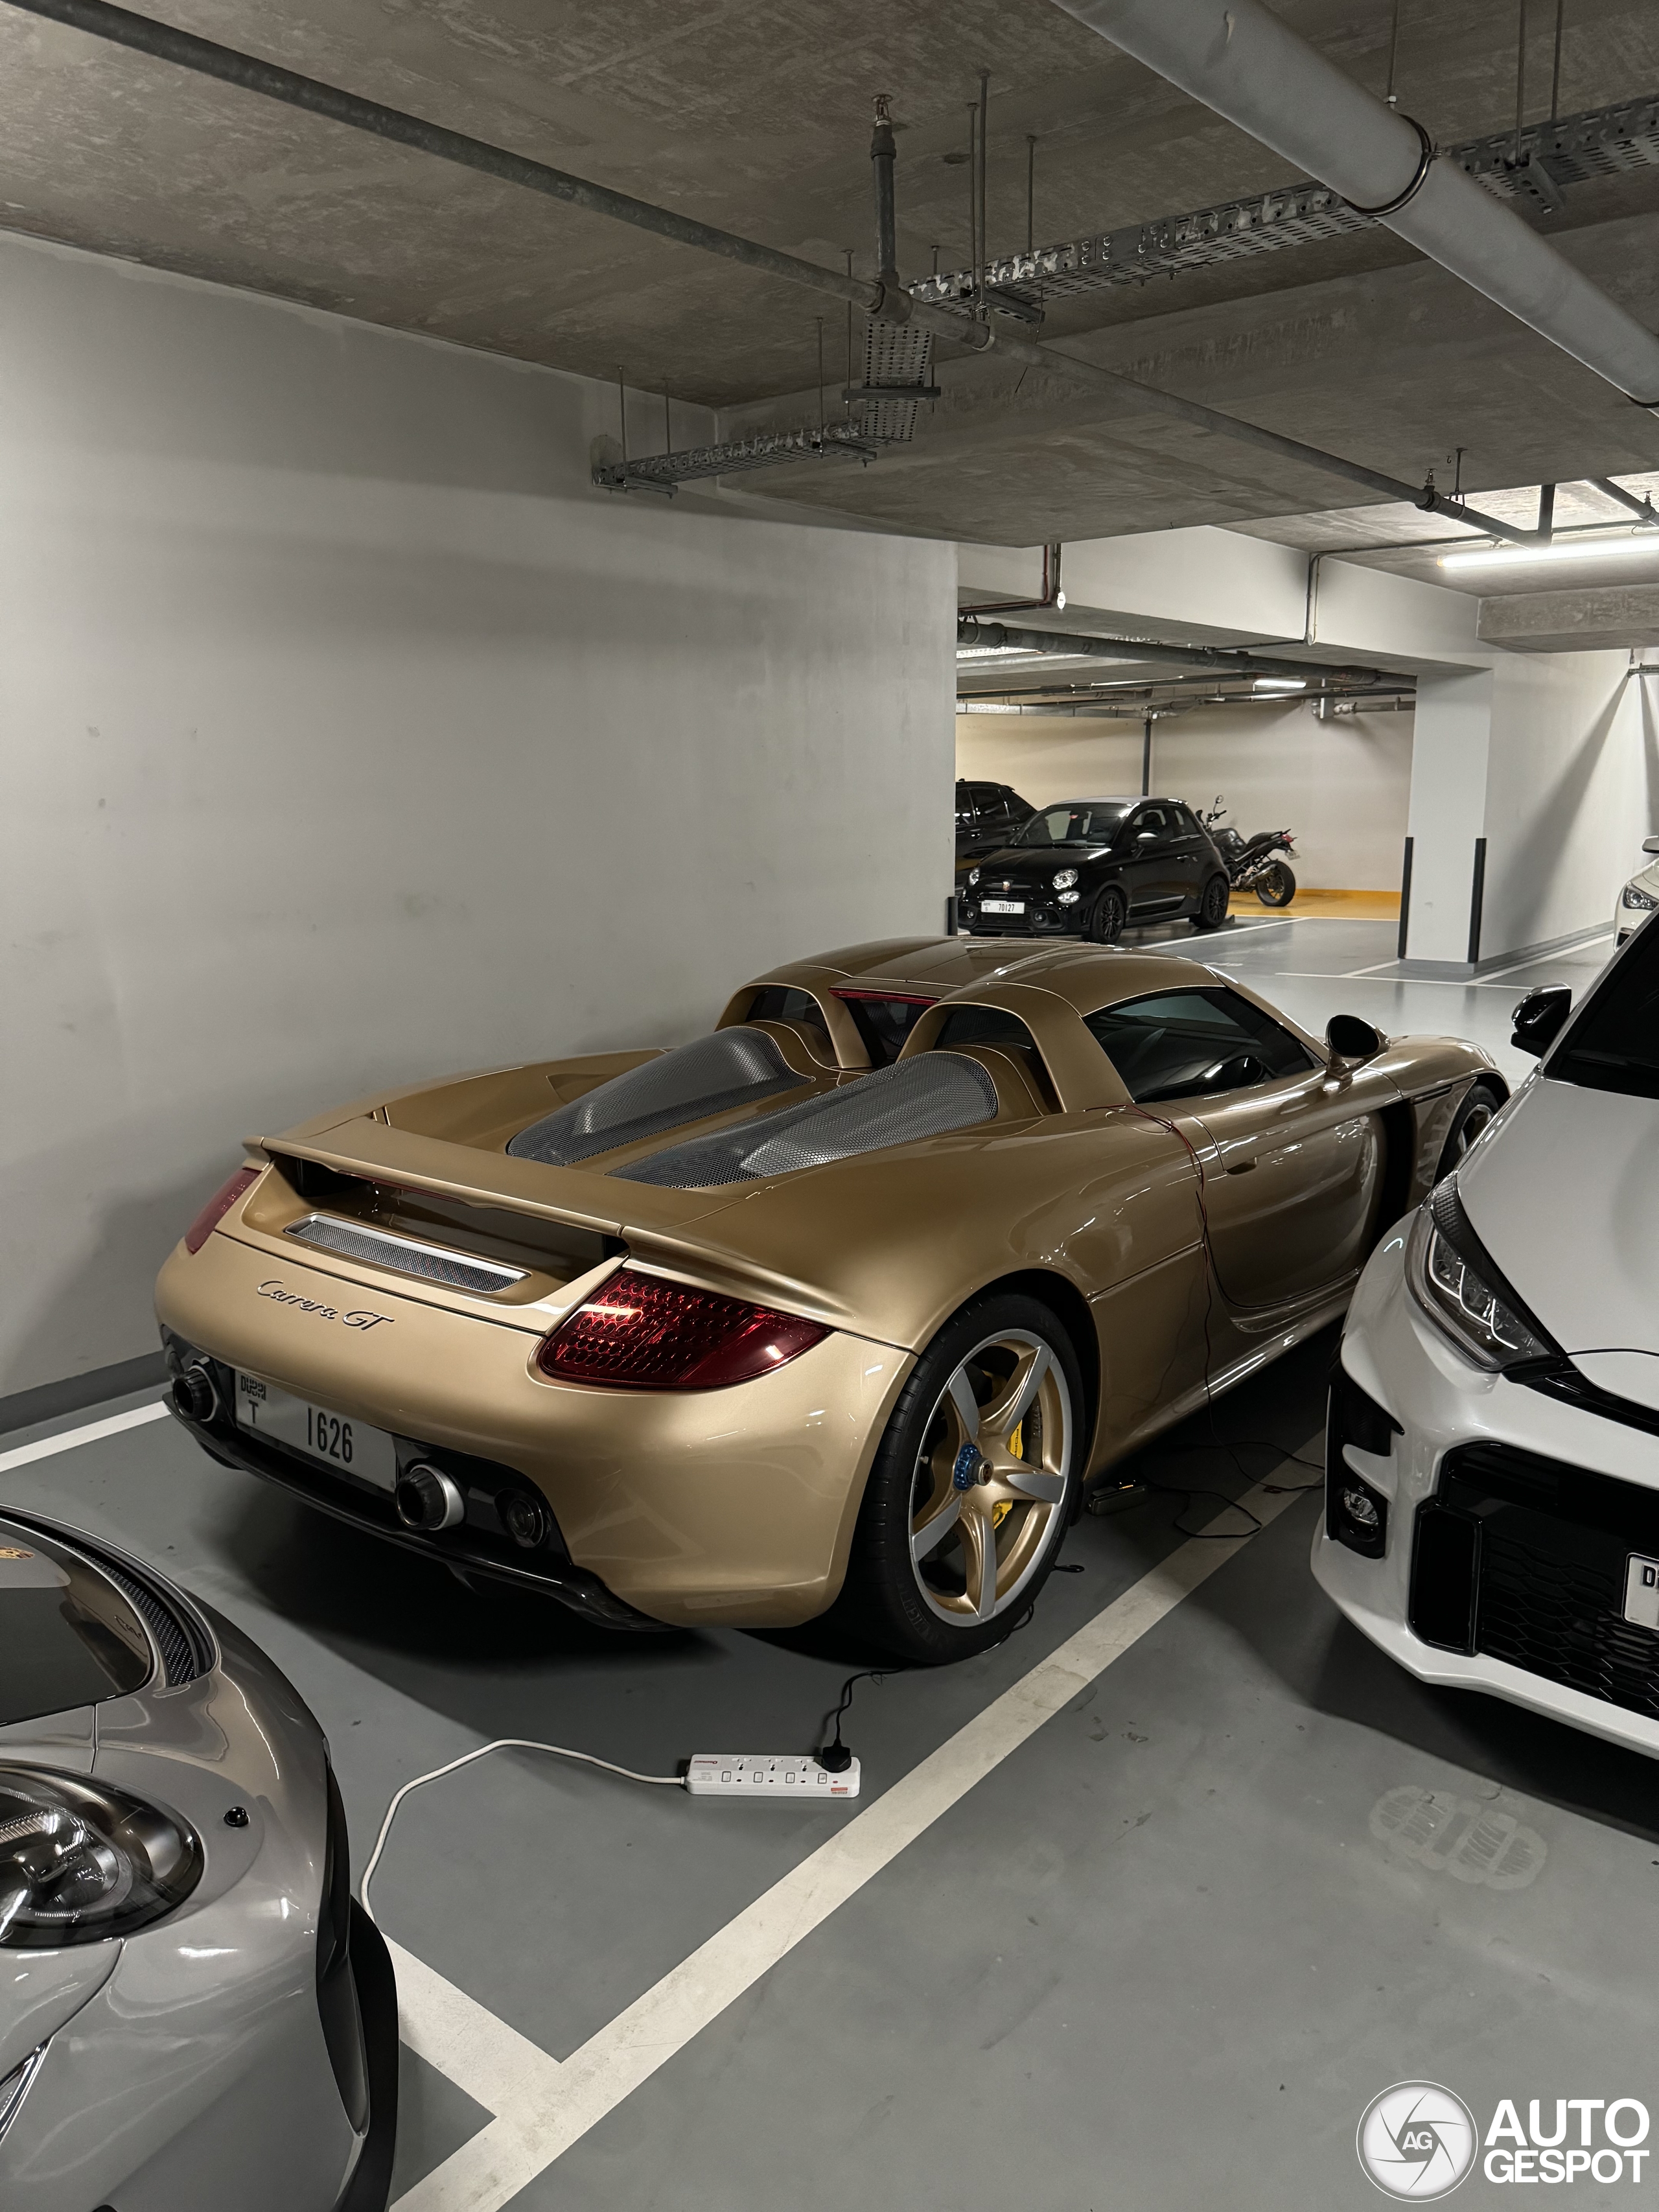 This Carrera GT breaks the mold!